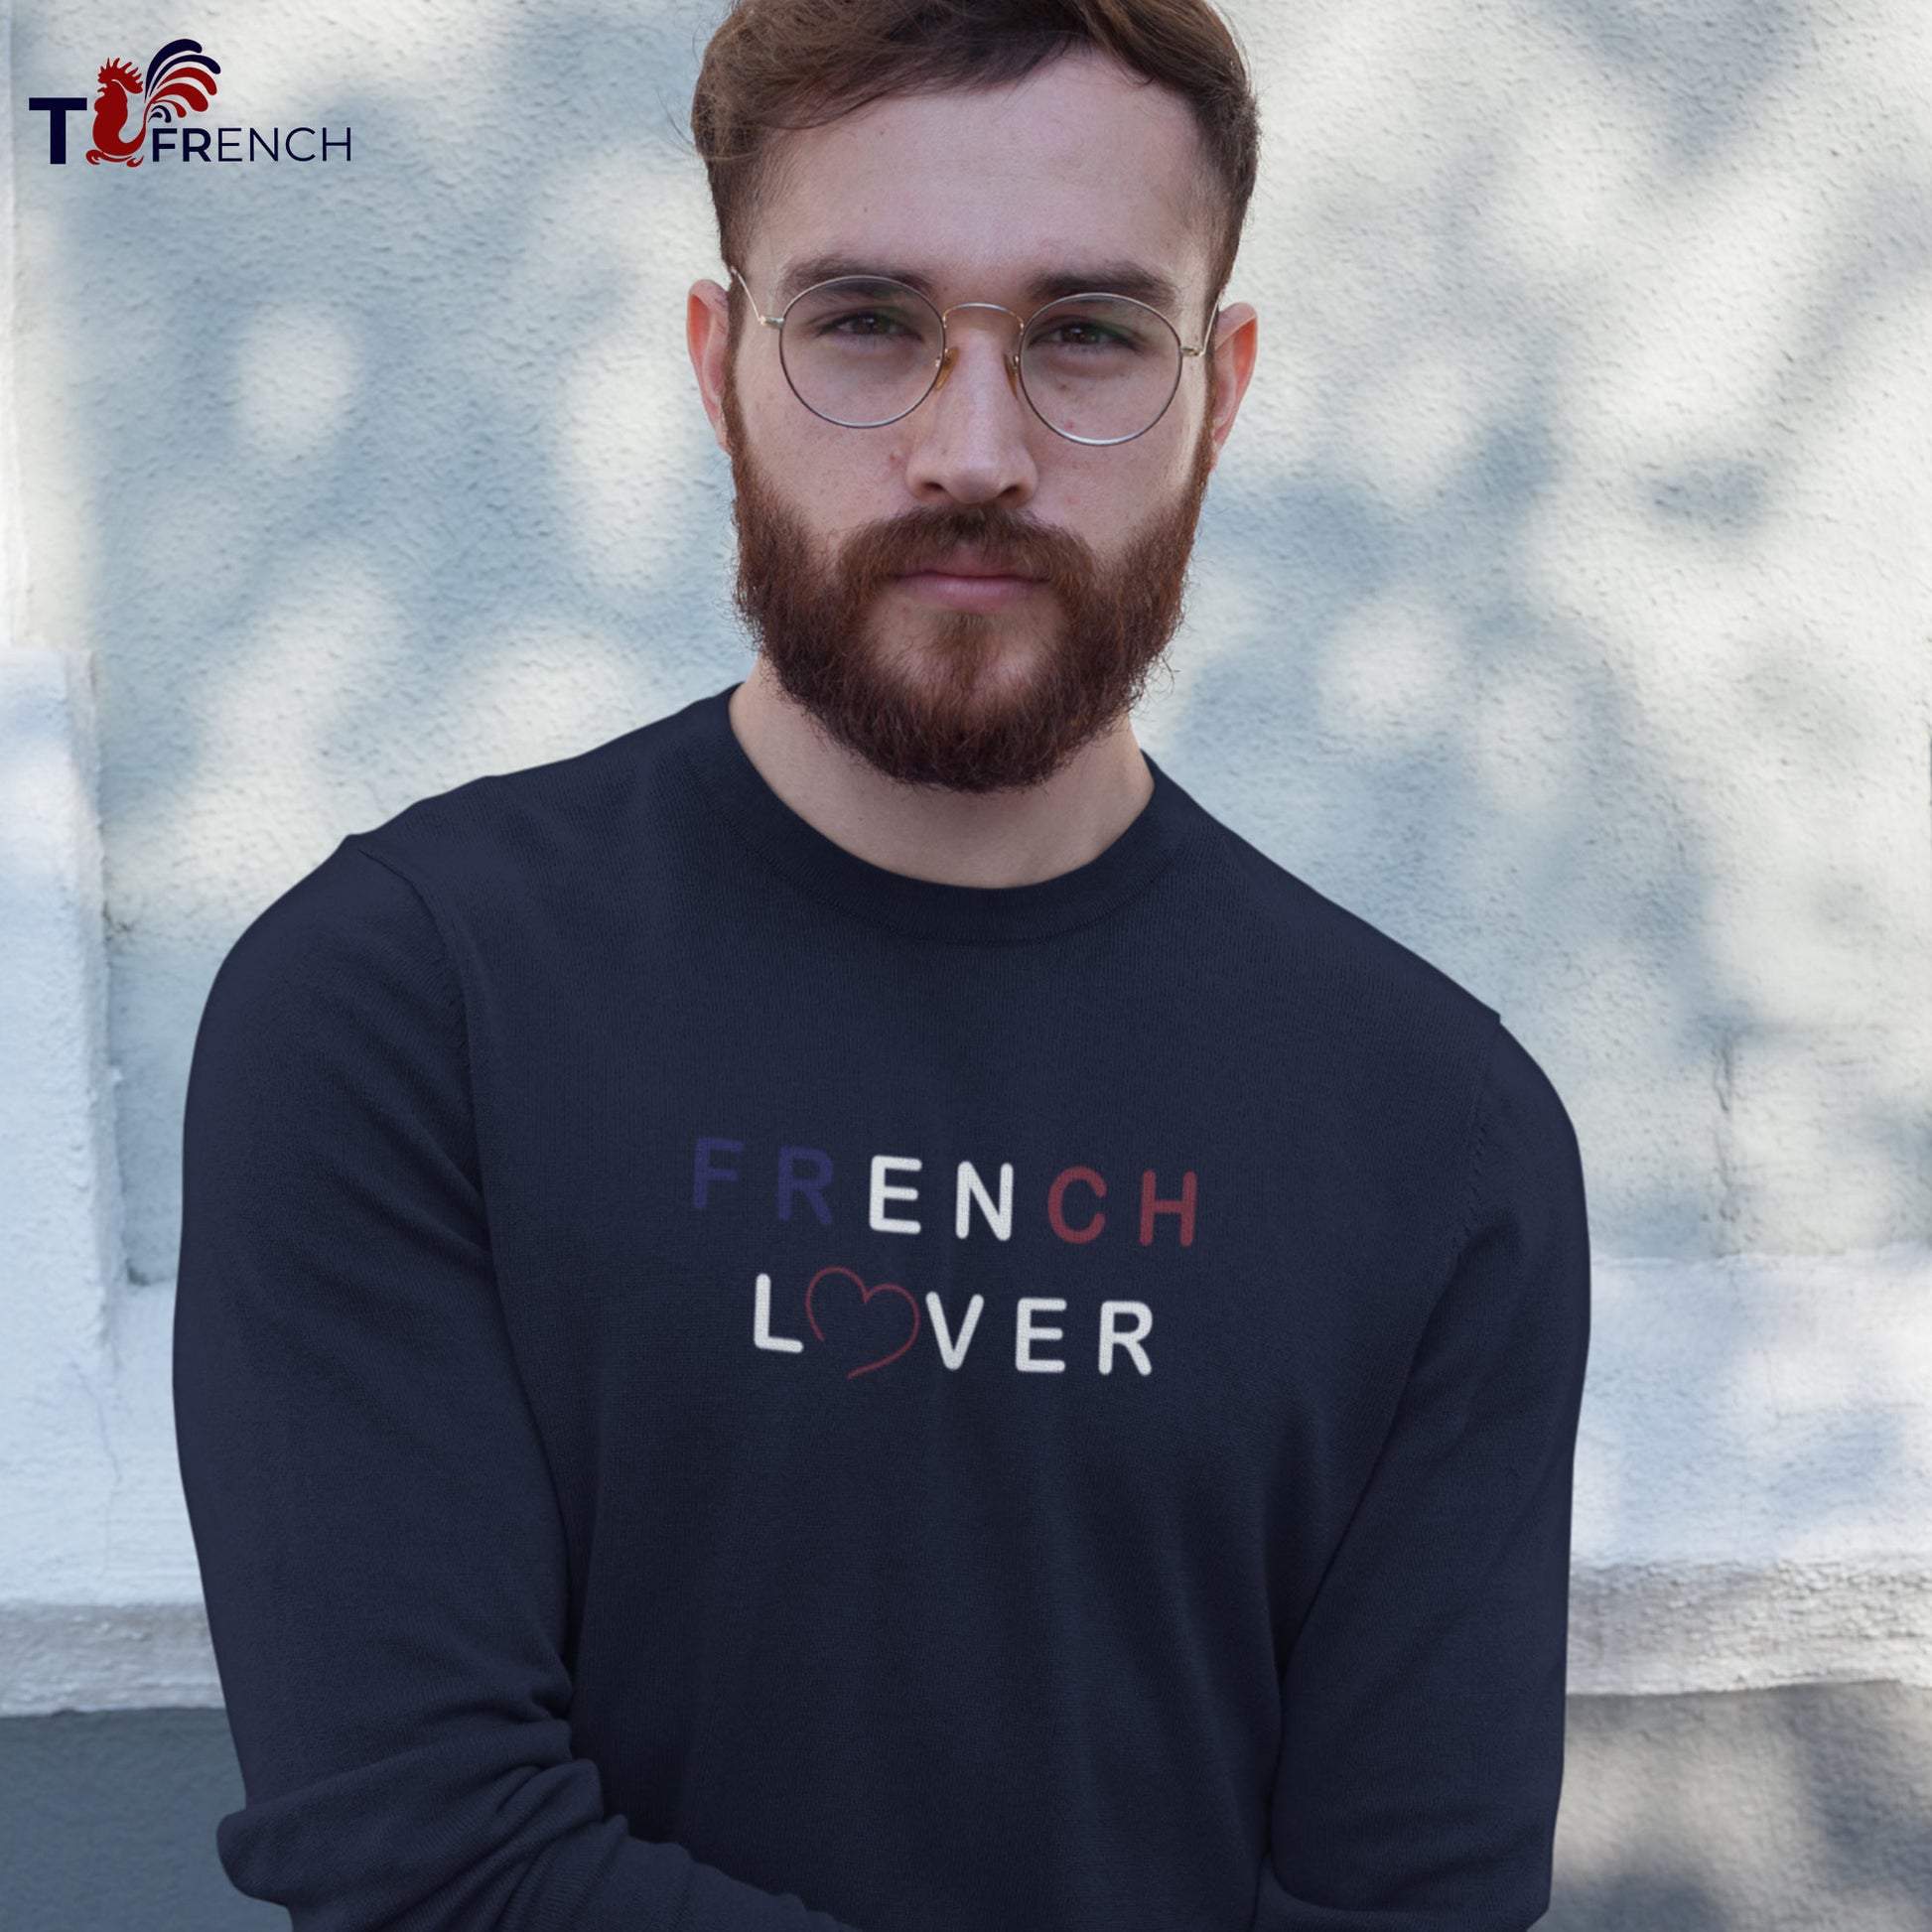 sweat homme bio french lover de T-French, sweat french lover, sweat saint valentin, sweat shirt french touch, sweatshirt homme french lover, sweat amour, sweat french touch, pull french lover, sweat séducteur, pull amour, sweat french lover bleu marine